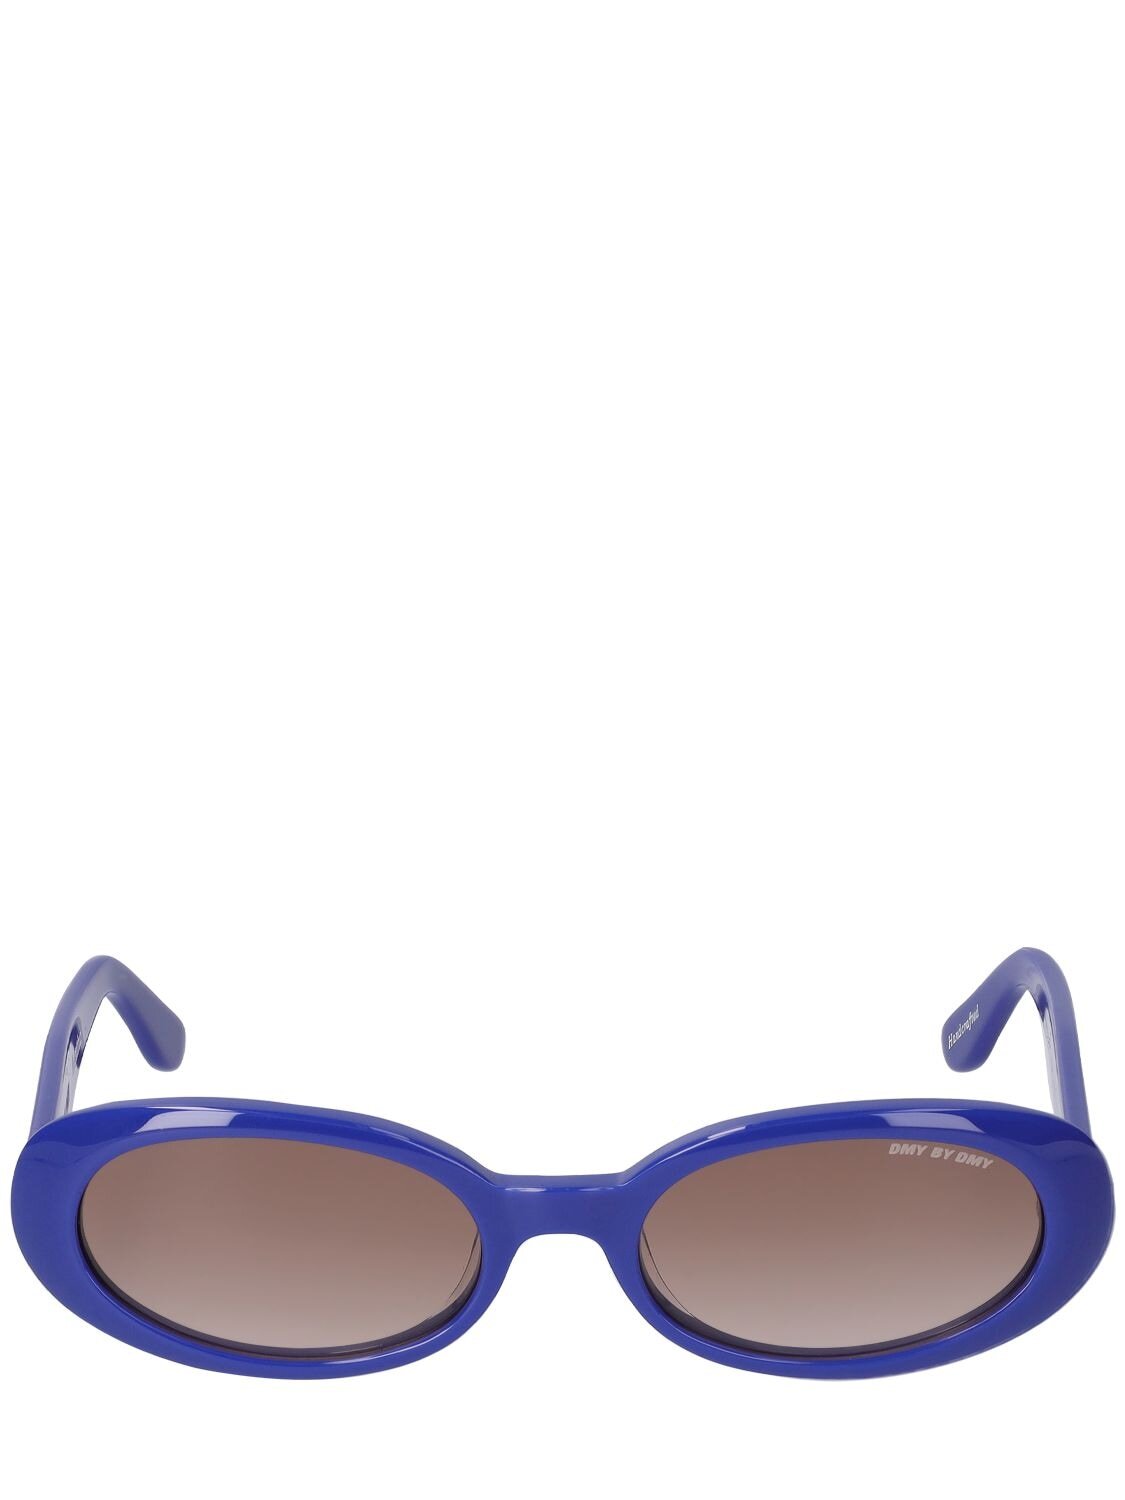 DMY BY DMY Valentina Oval Acetate Sunglasses in blue / brown